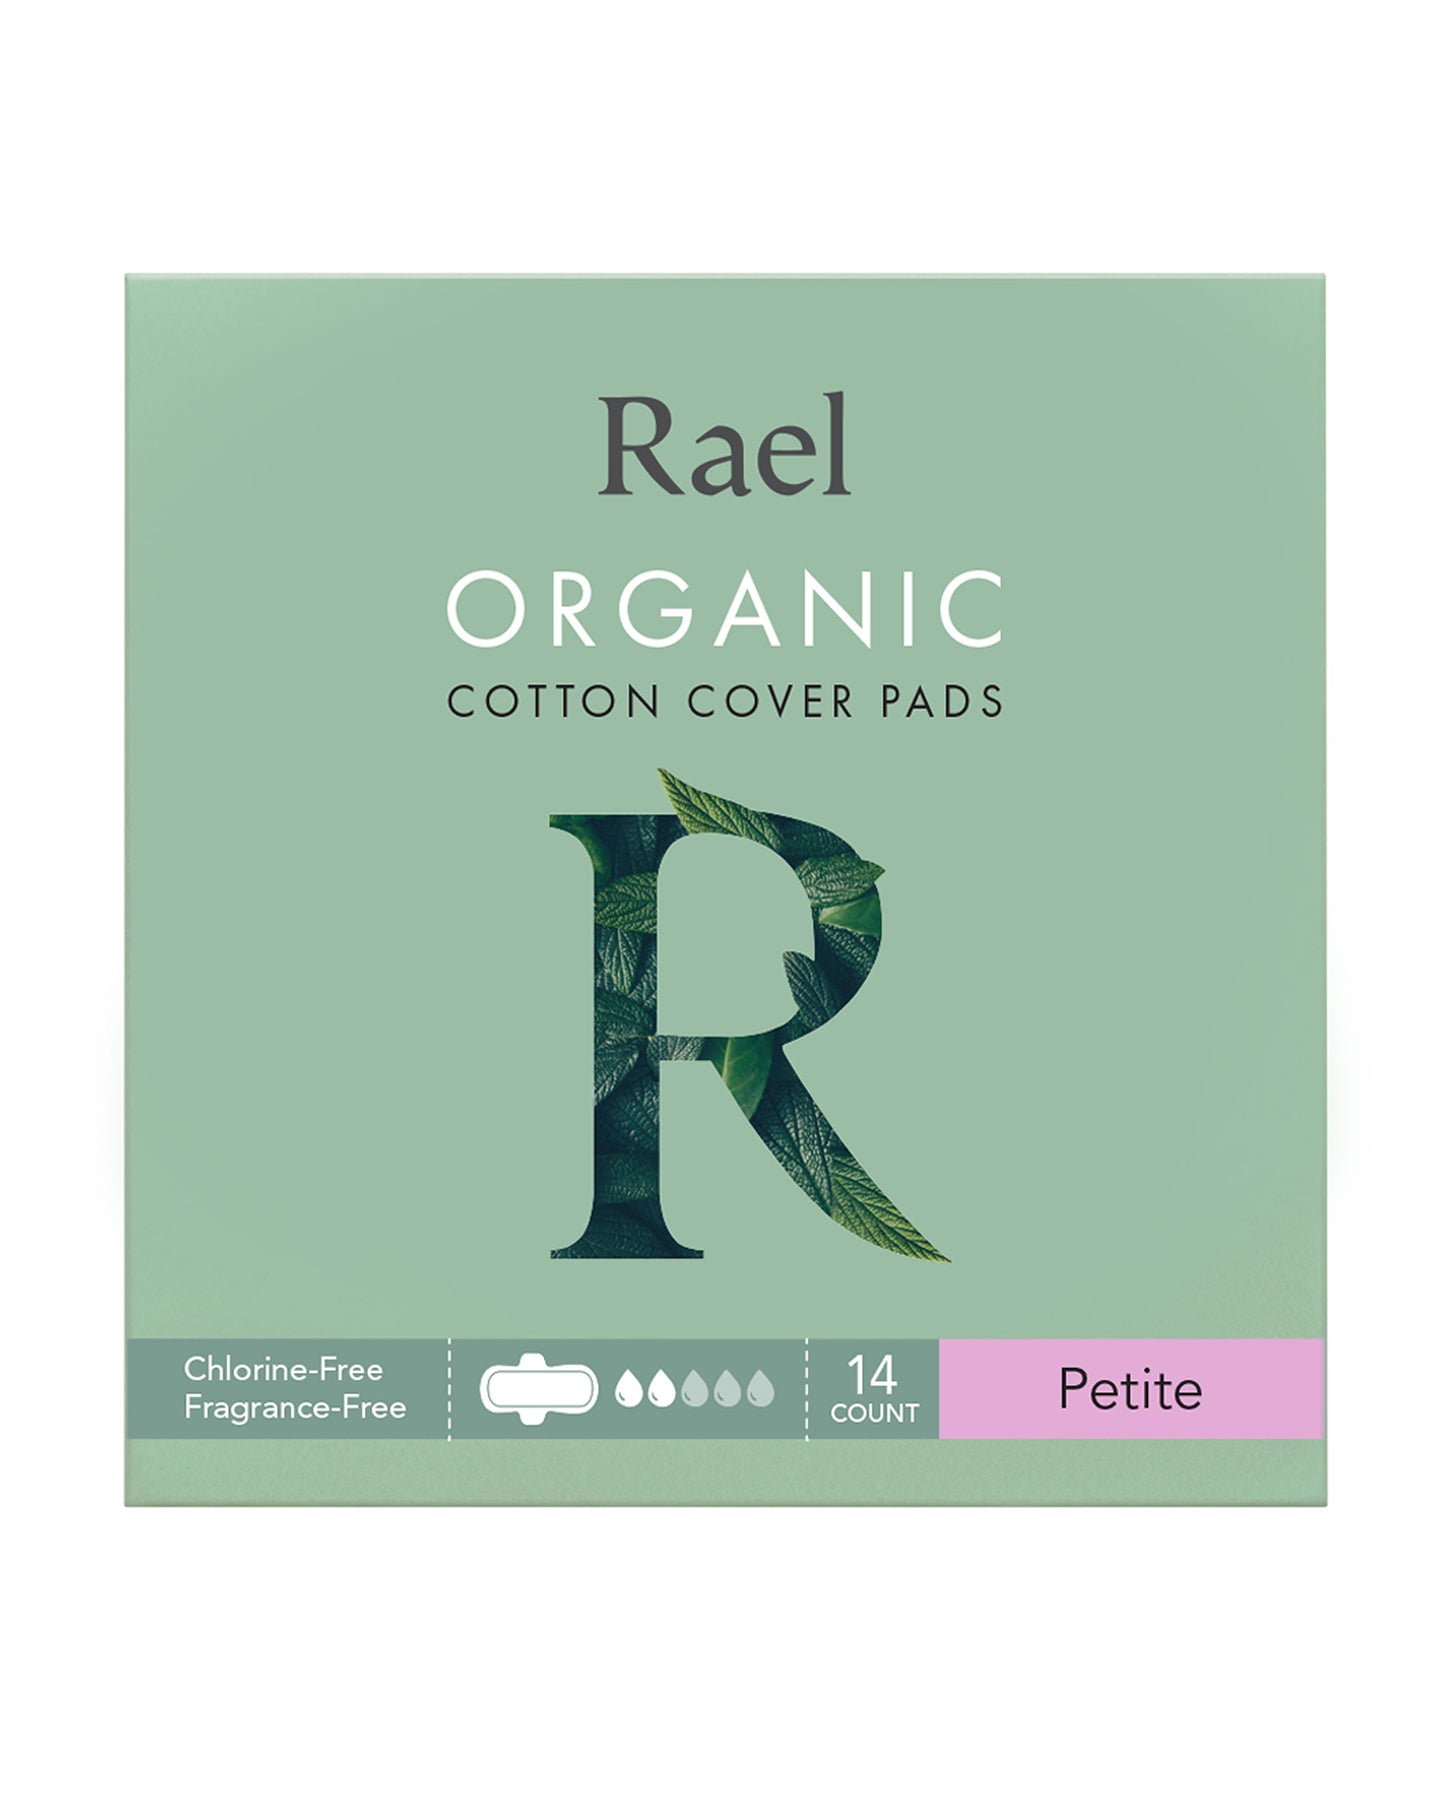 Organic Cotton Cover Pads for Periods